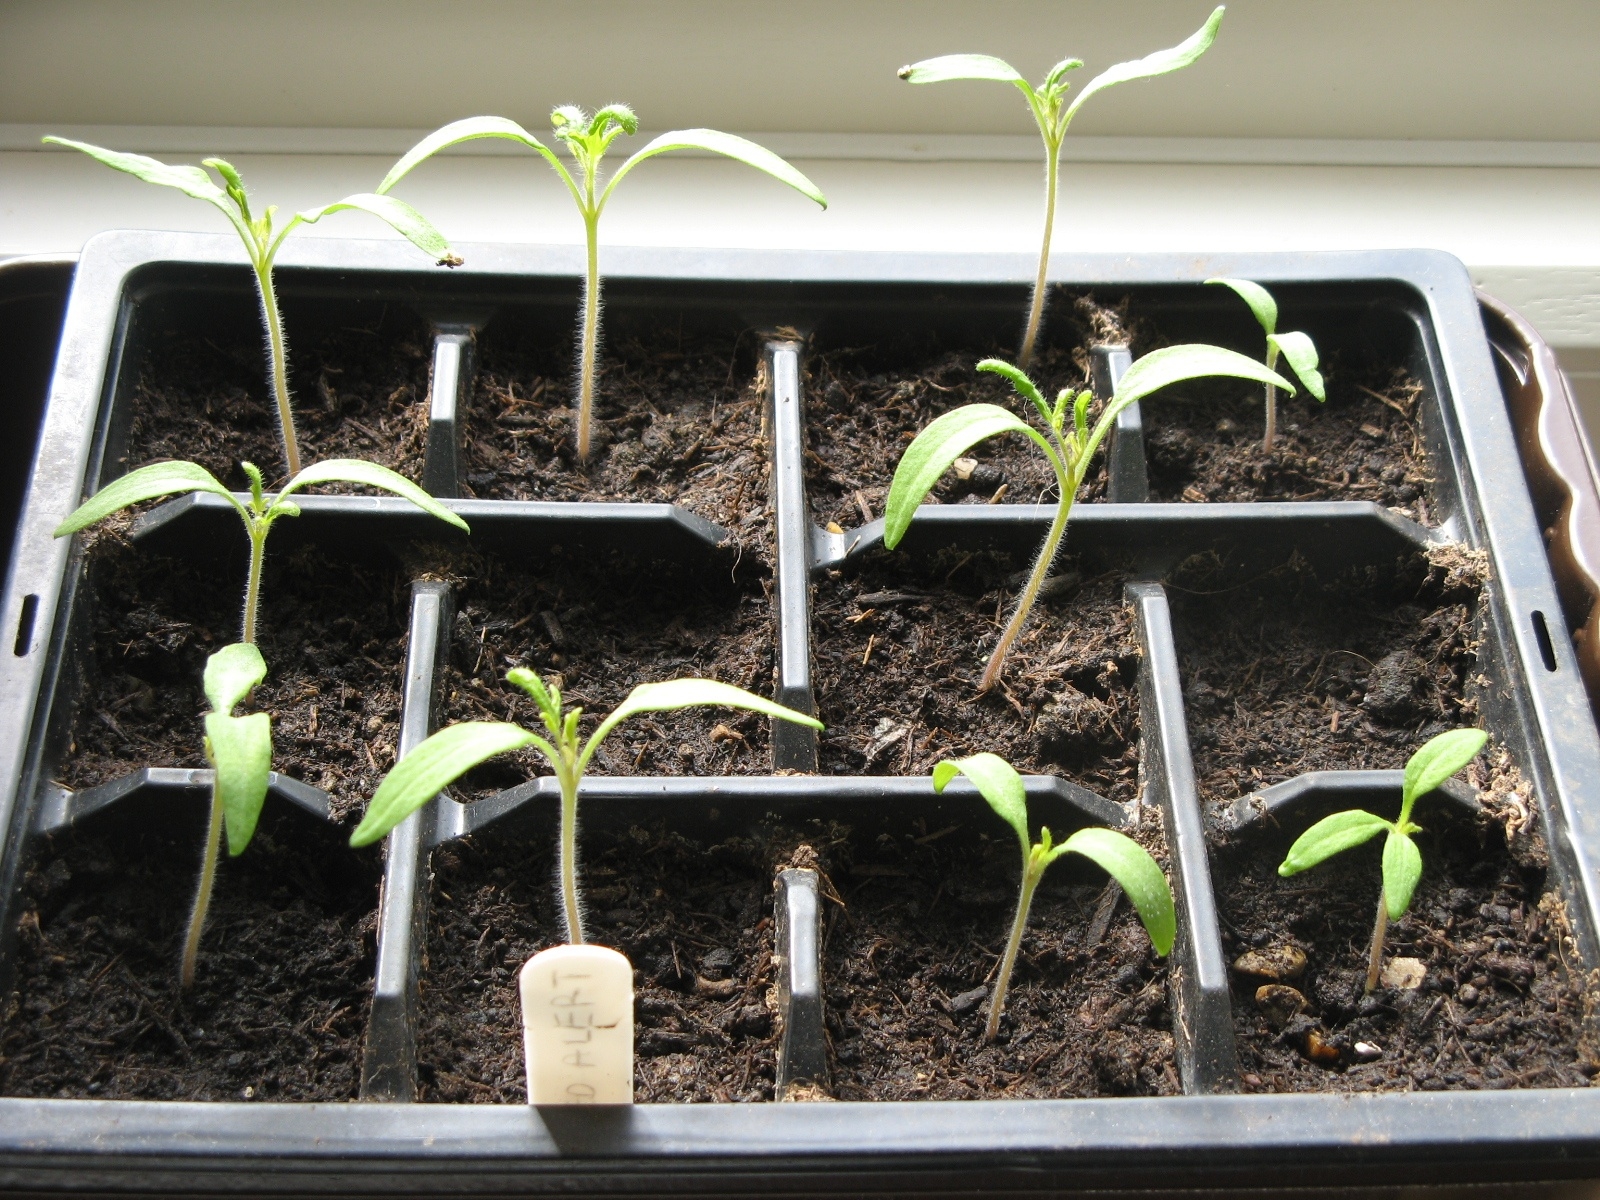 Easy Planting Tomato Seeds From Fresh Tomatoes Image for Are My Tomato Seedlings Leggy? (And Other Tomato Seedling Advice)